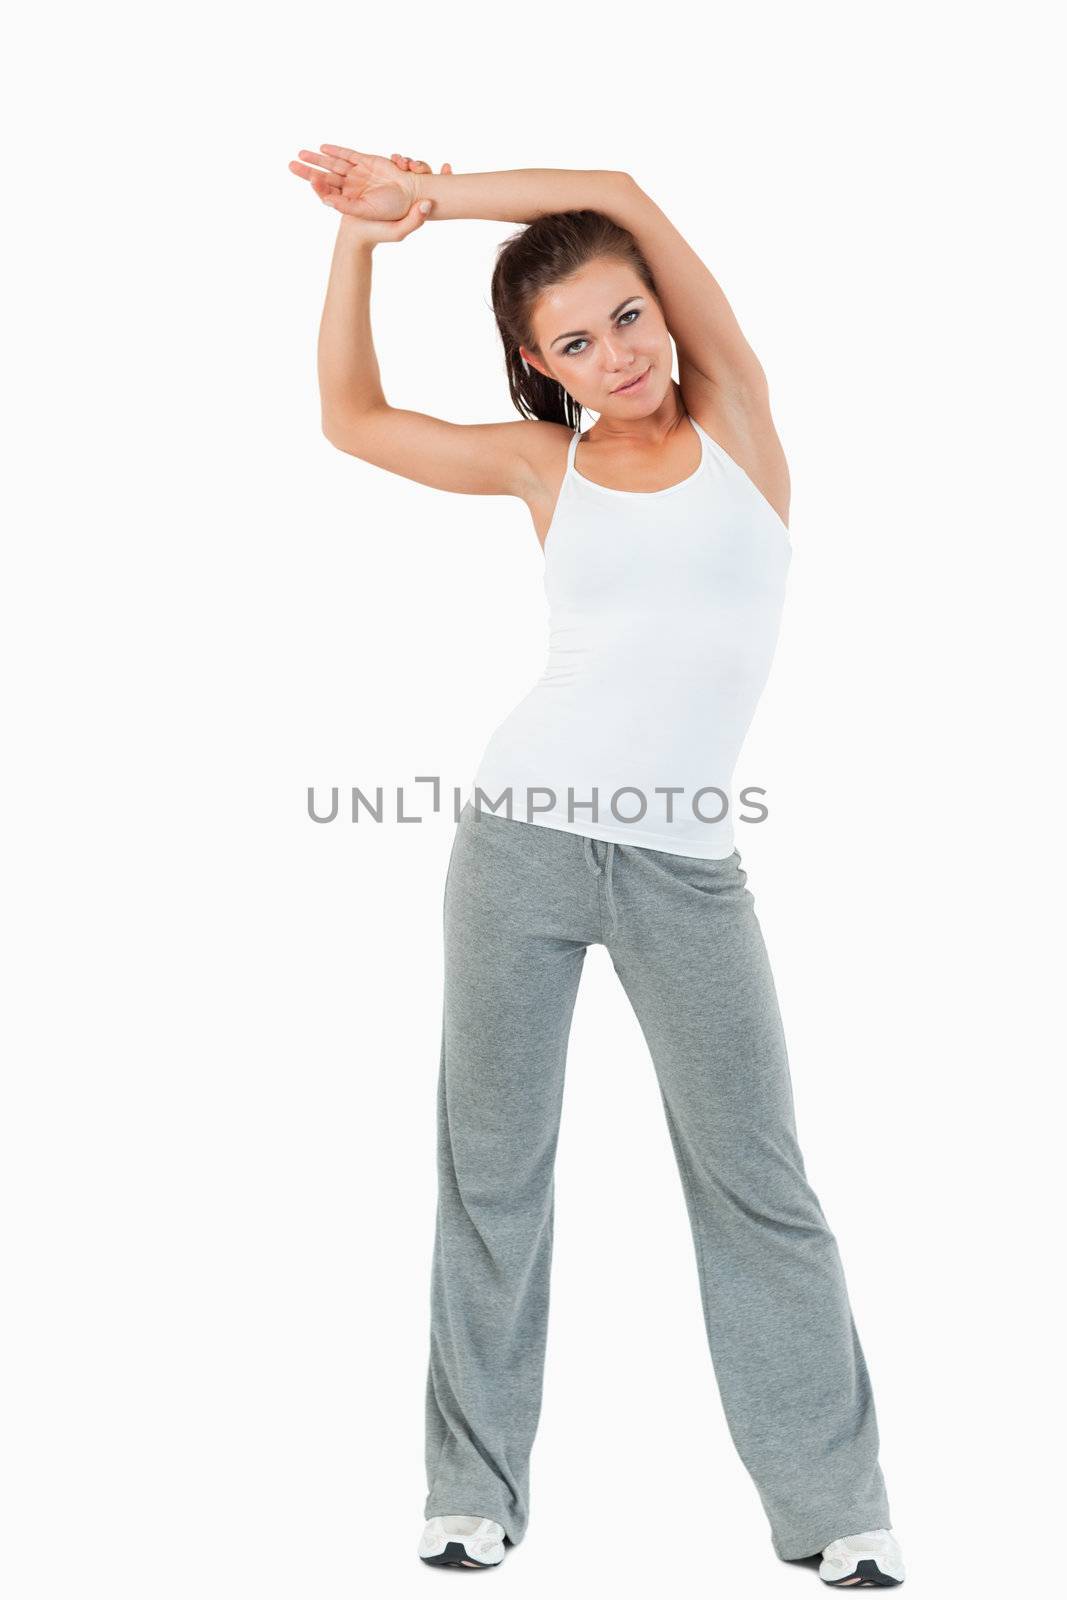 Portrait of a sports woman stretching her arms by Wavebreakmedia